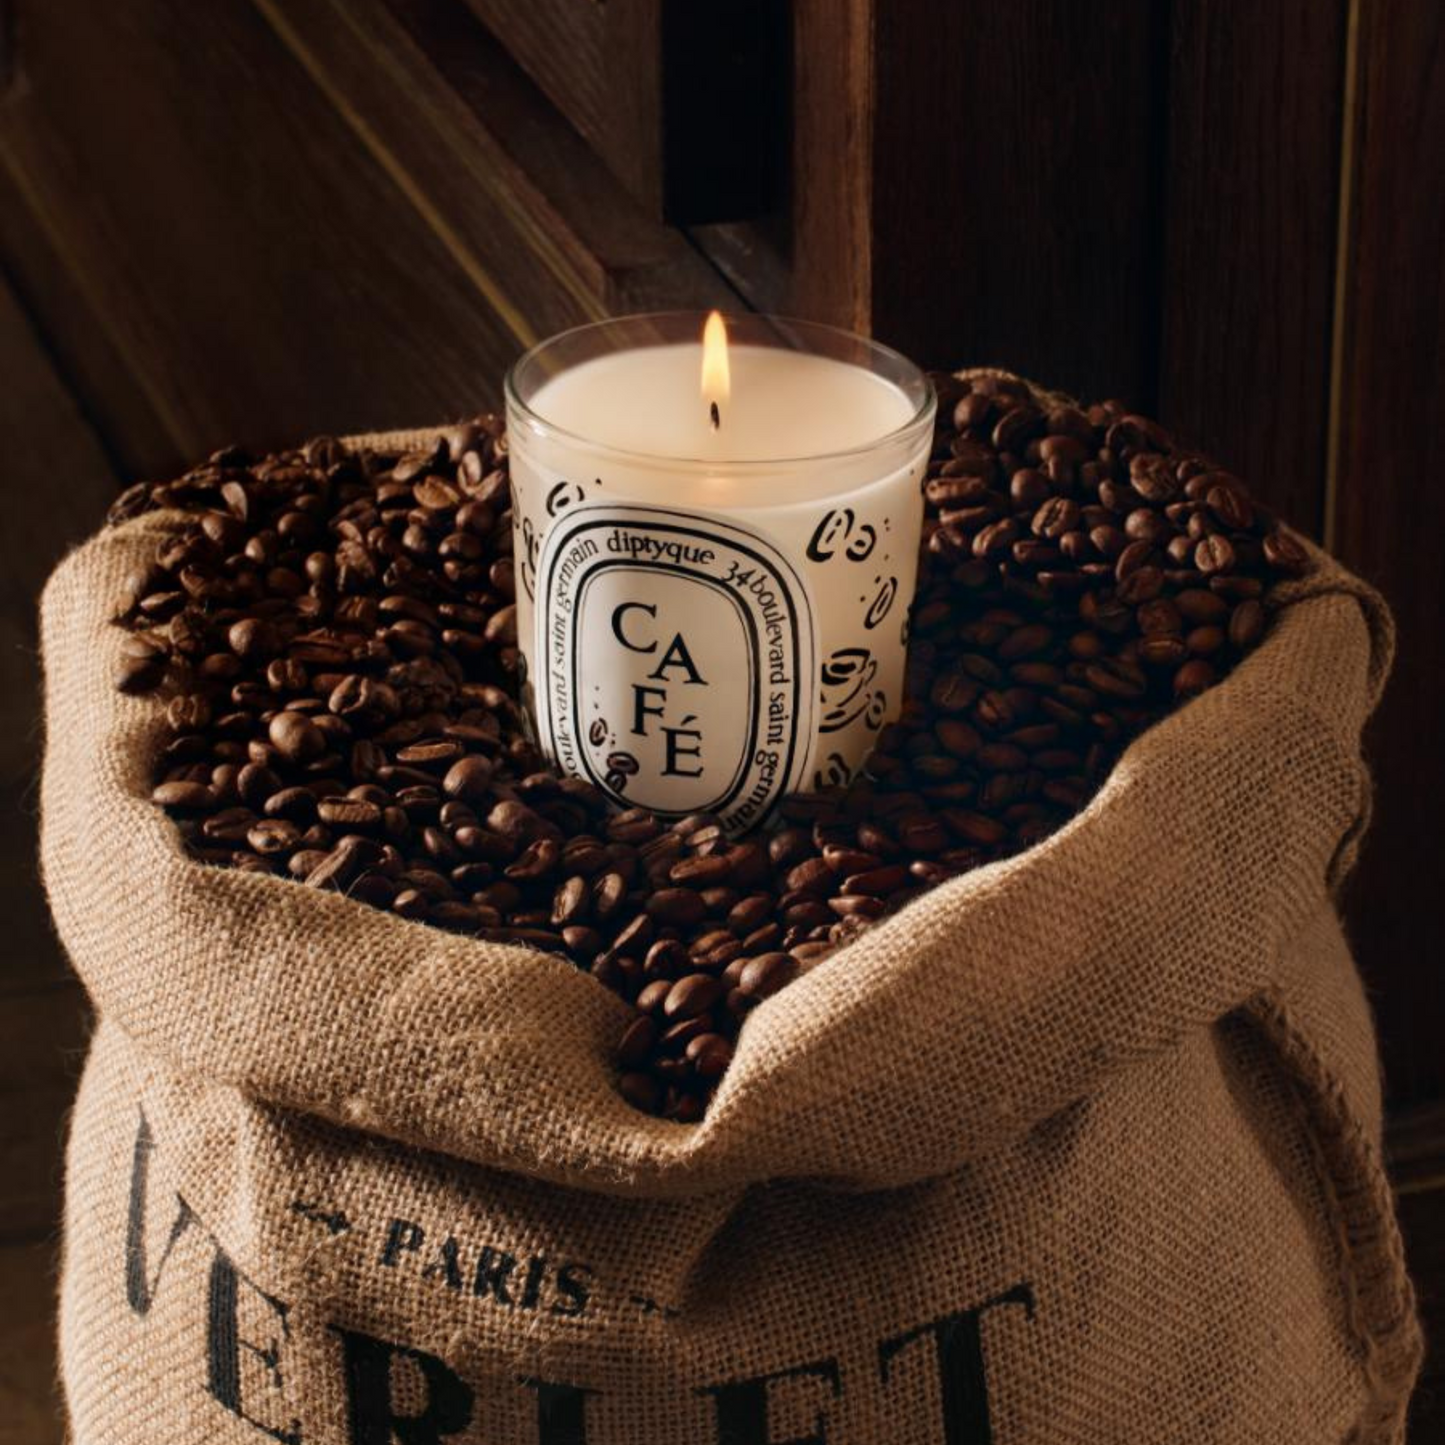 Diptyque - Classic Candle - Café (Coffee)